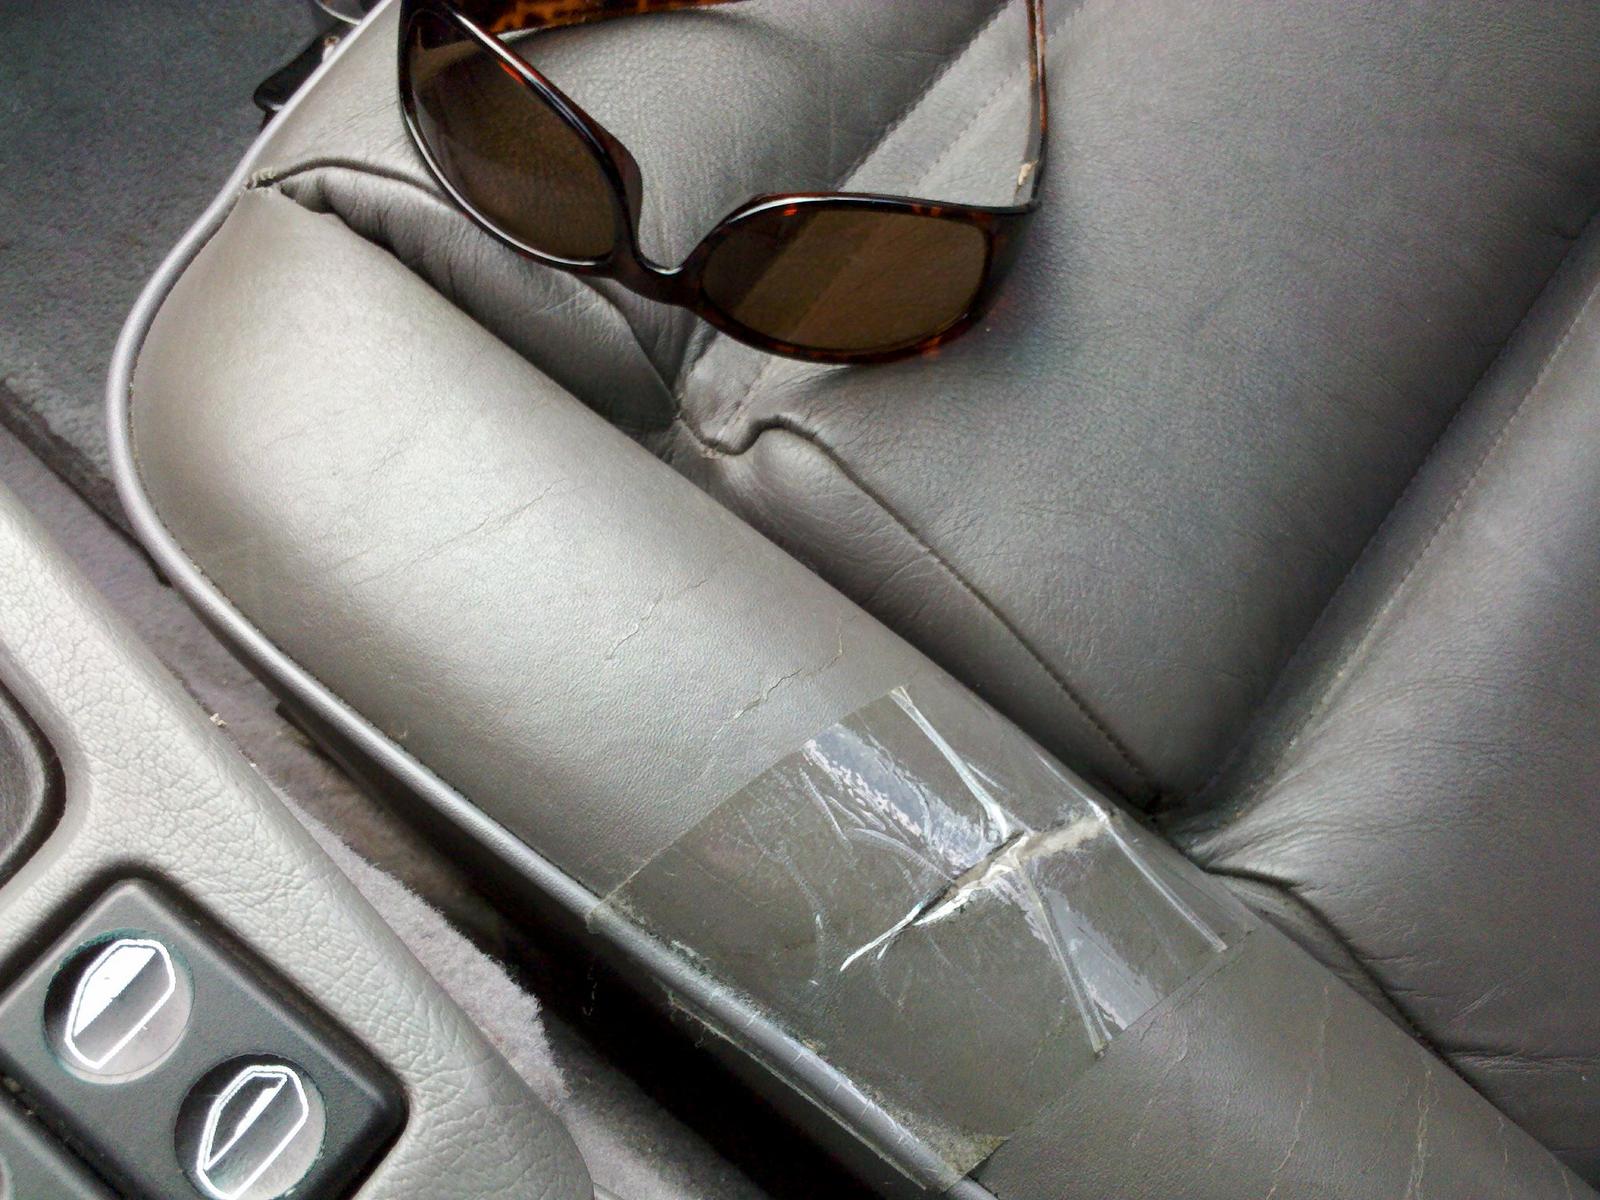 How To Repair Cracked Car Leather Seats In 10 Minutes